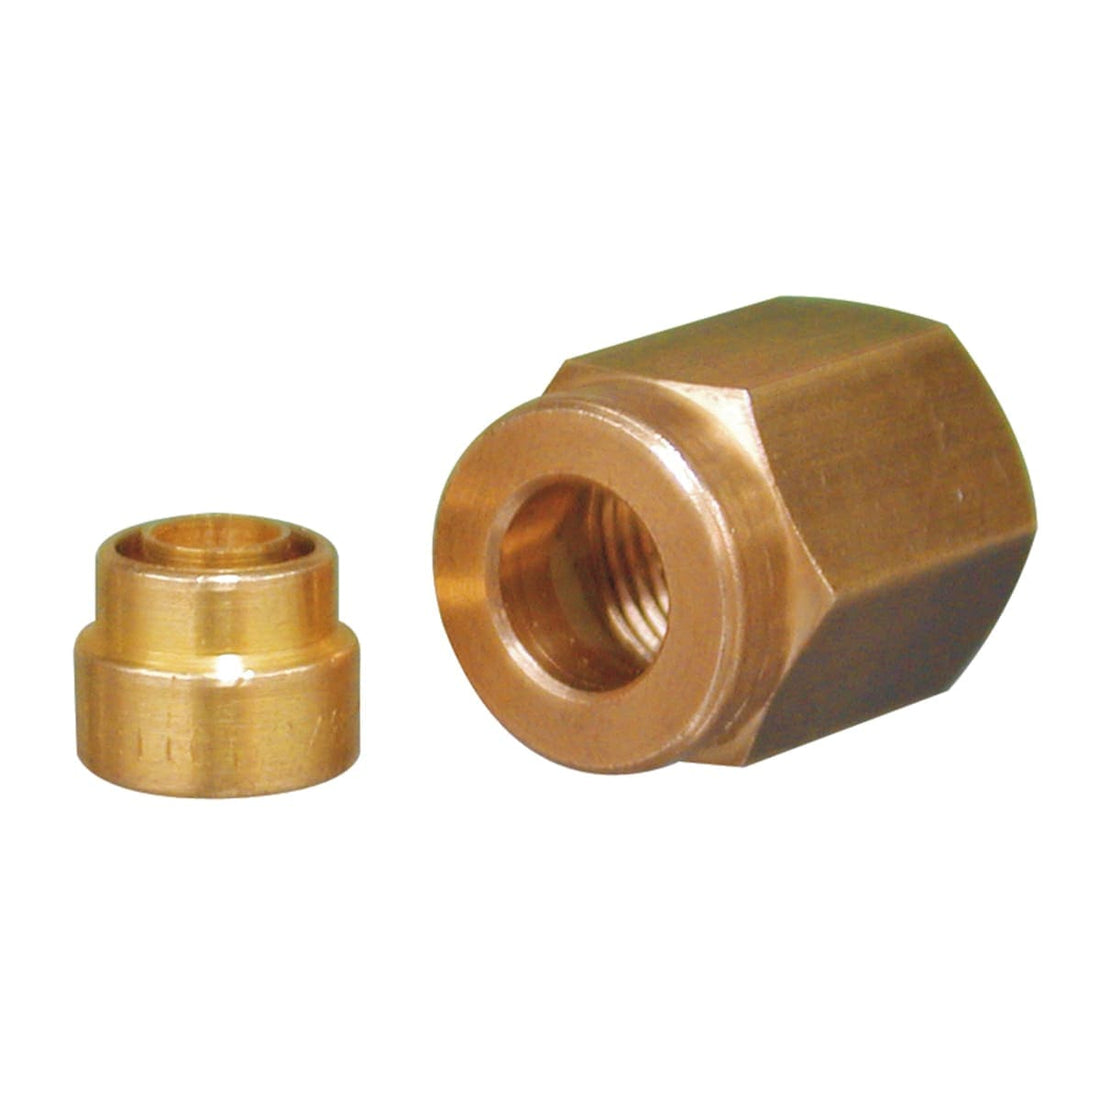 1/2 INCH DIA. SELF-CLOSING UNION FOR COPPER AIR CONDITIONING PIPE